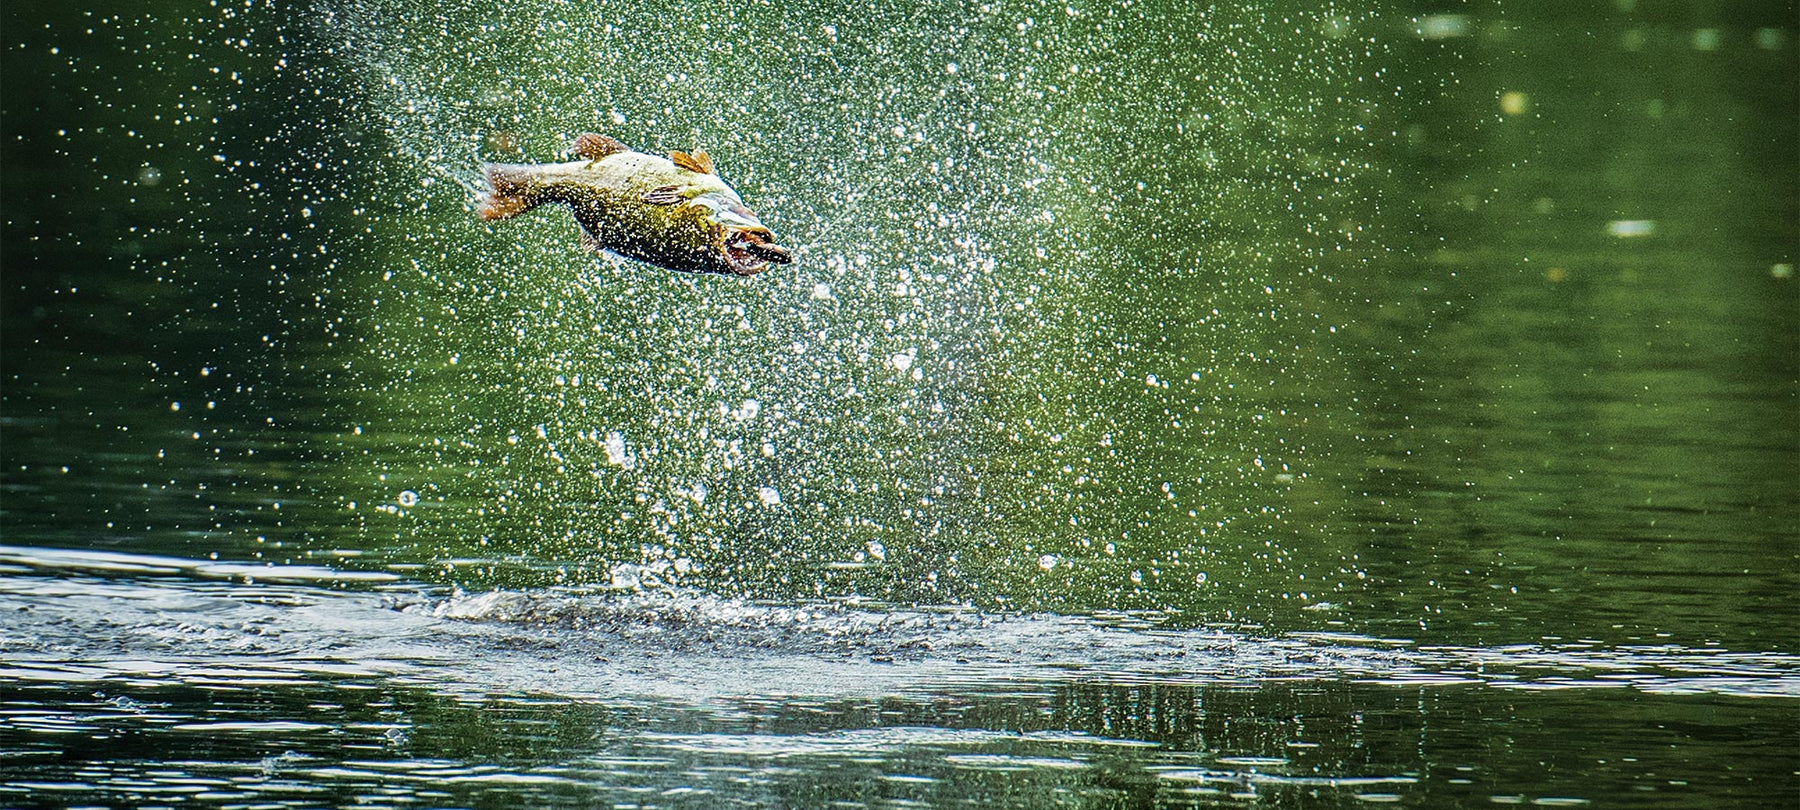 Fish mid jump out of water attacking a topwater lure